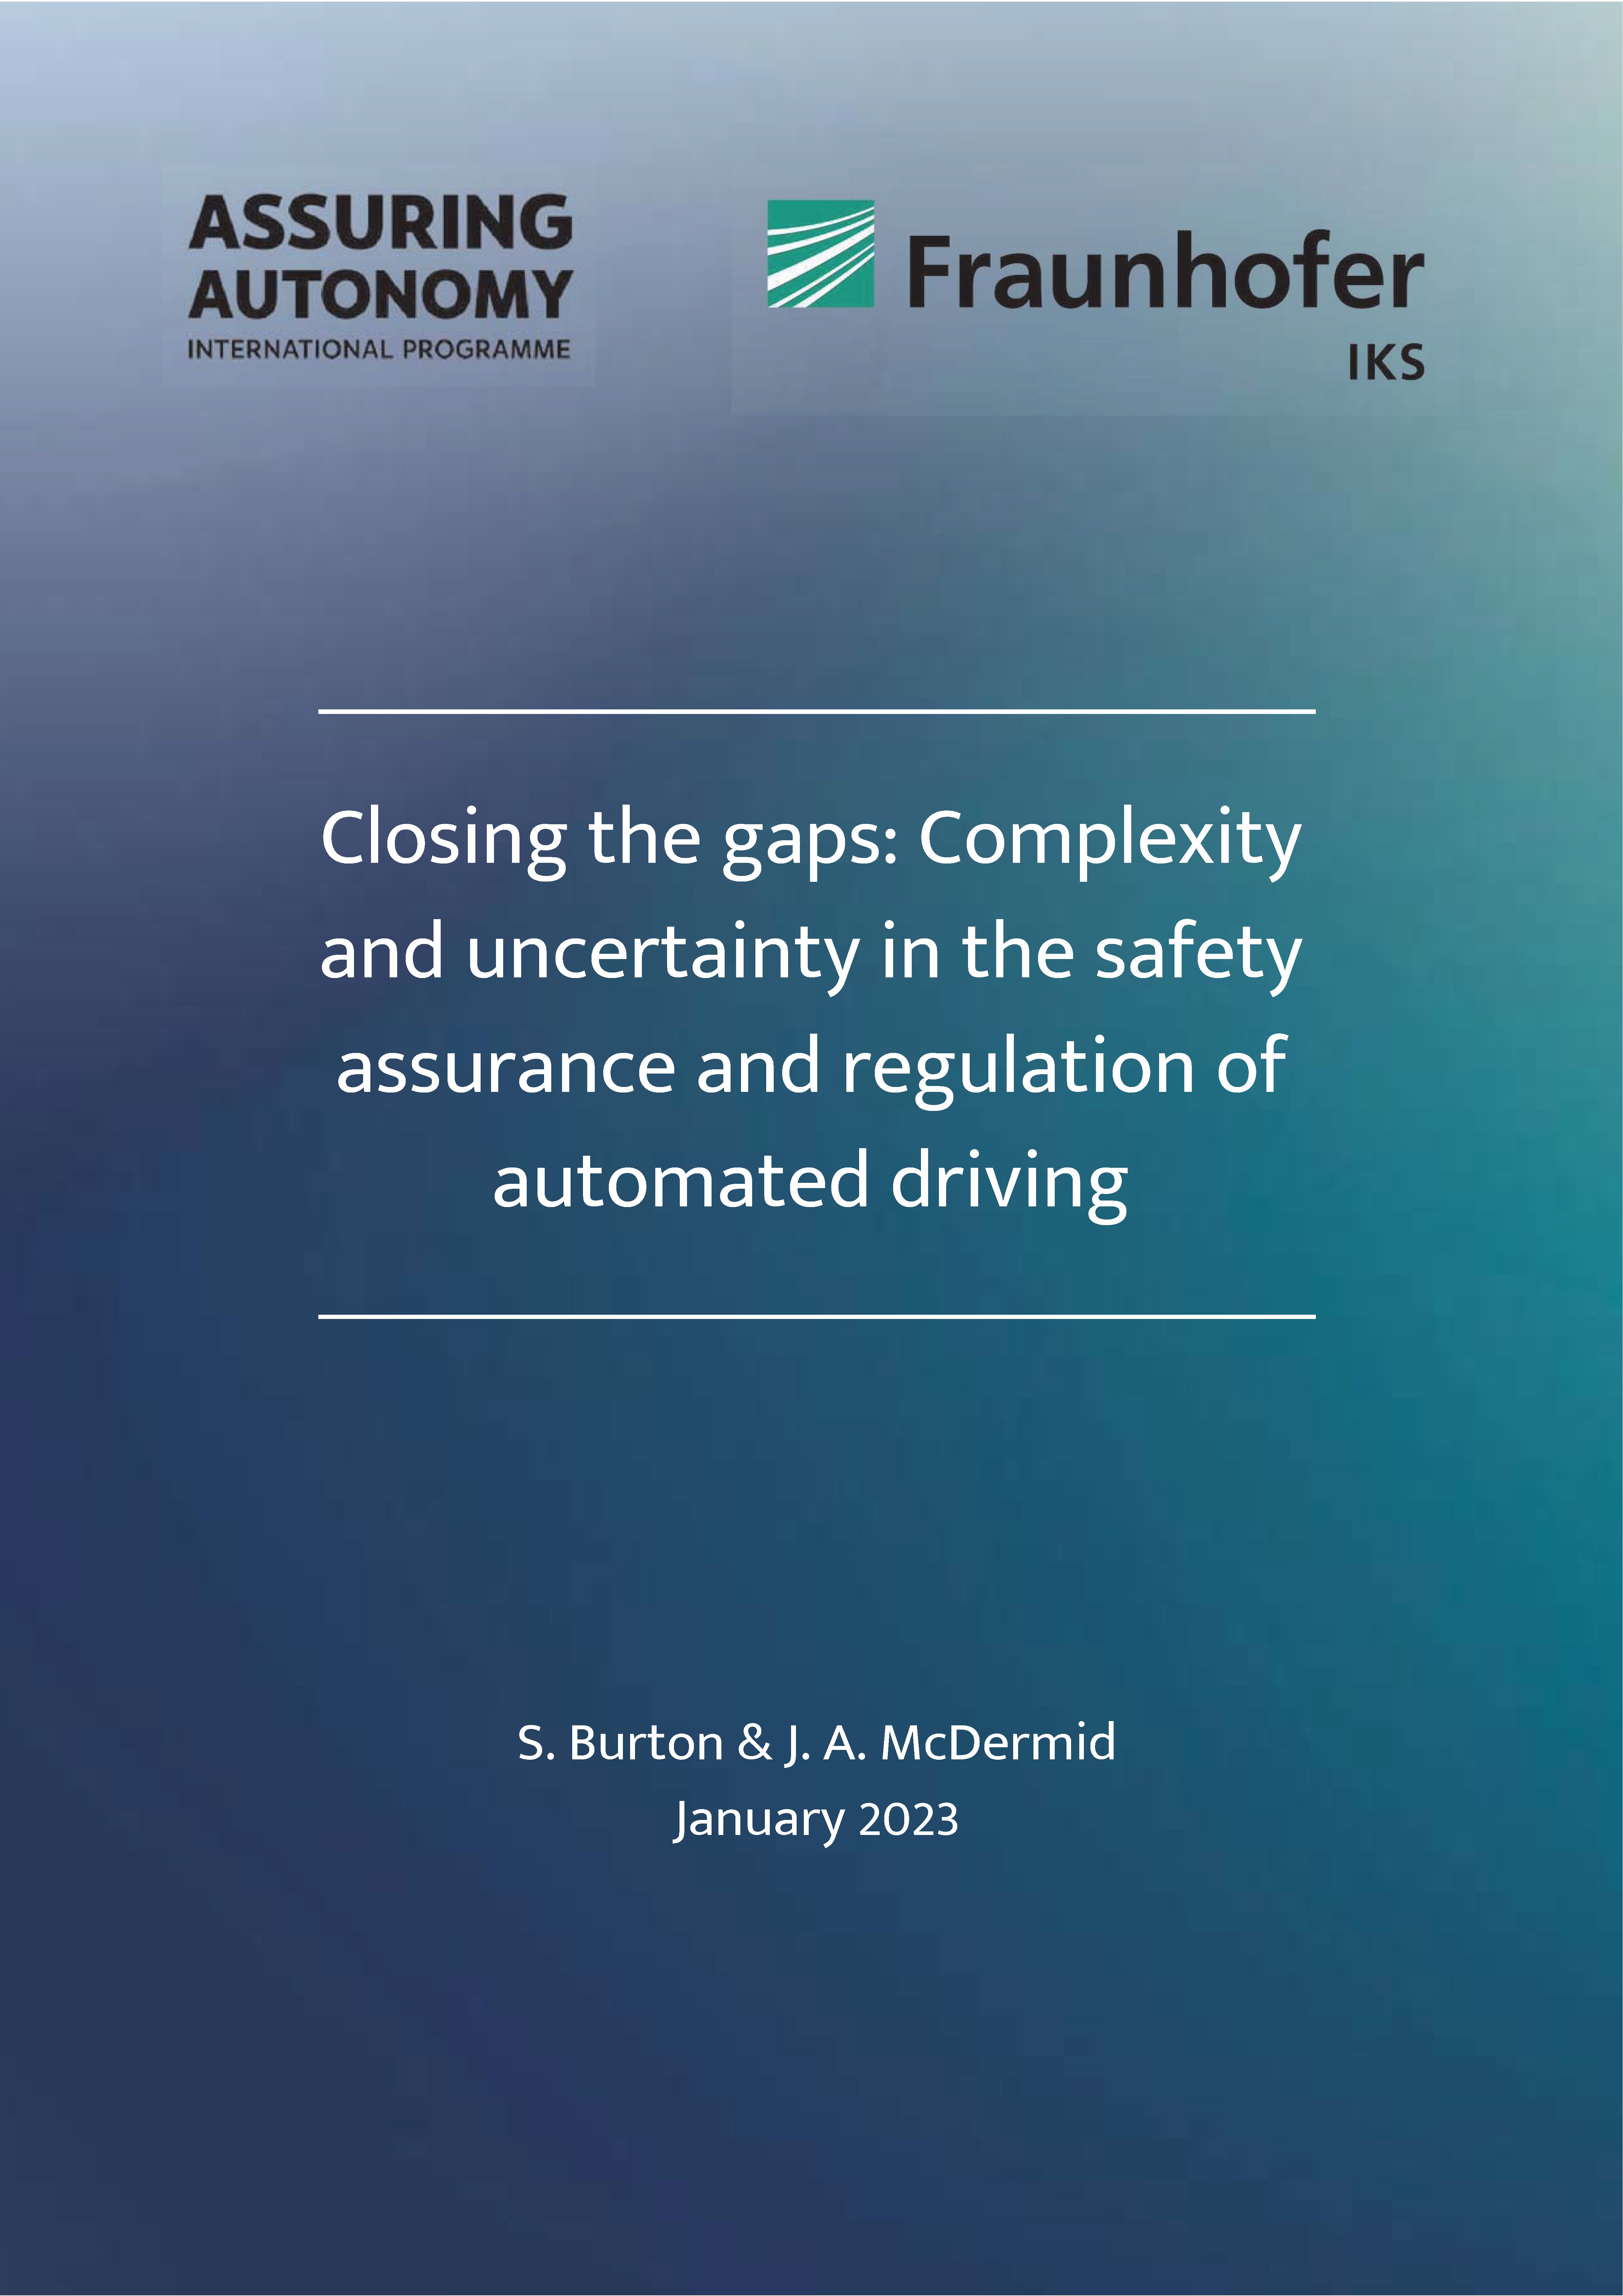 Titelbild des Whitepapers »Closing the caps: Complexity and uncertainty in the safety assurance and regulation of automated driving«